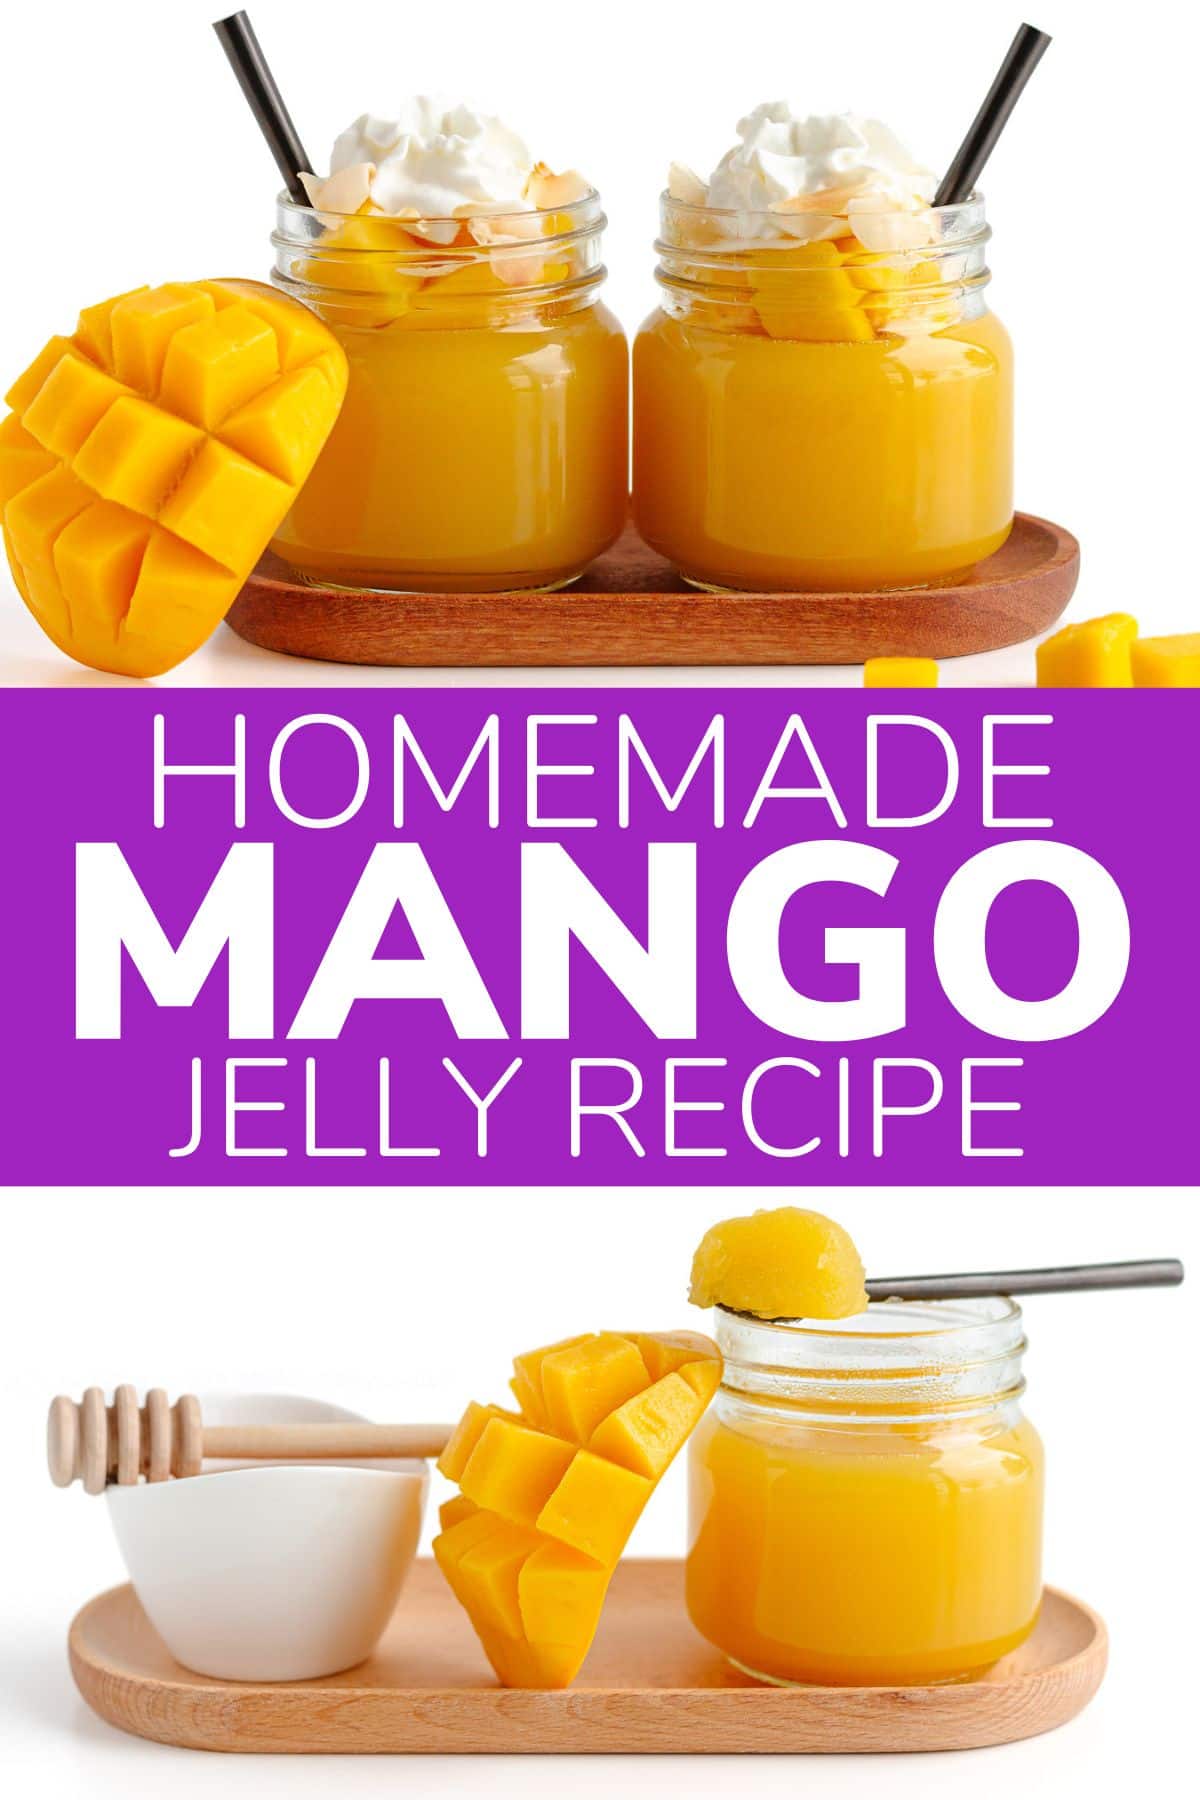 Graphic showing two photos of mango jellies and text overlay in the center that reads "Homemade Mango Jelly Recipe".